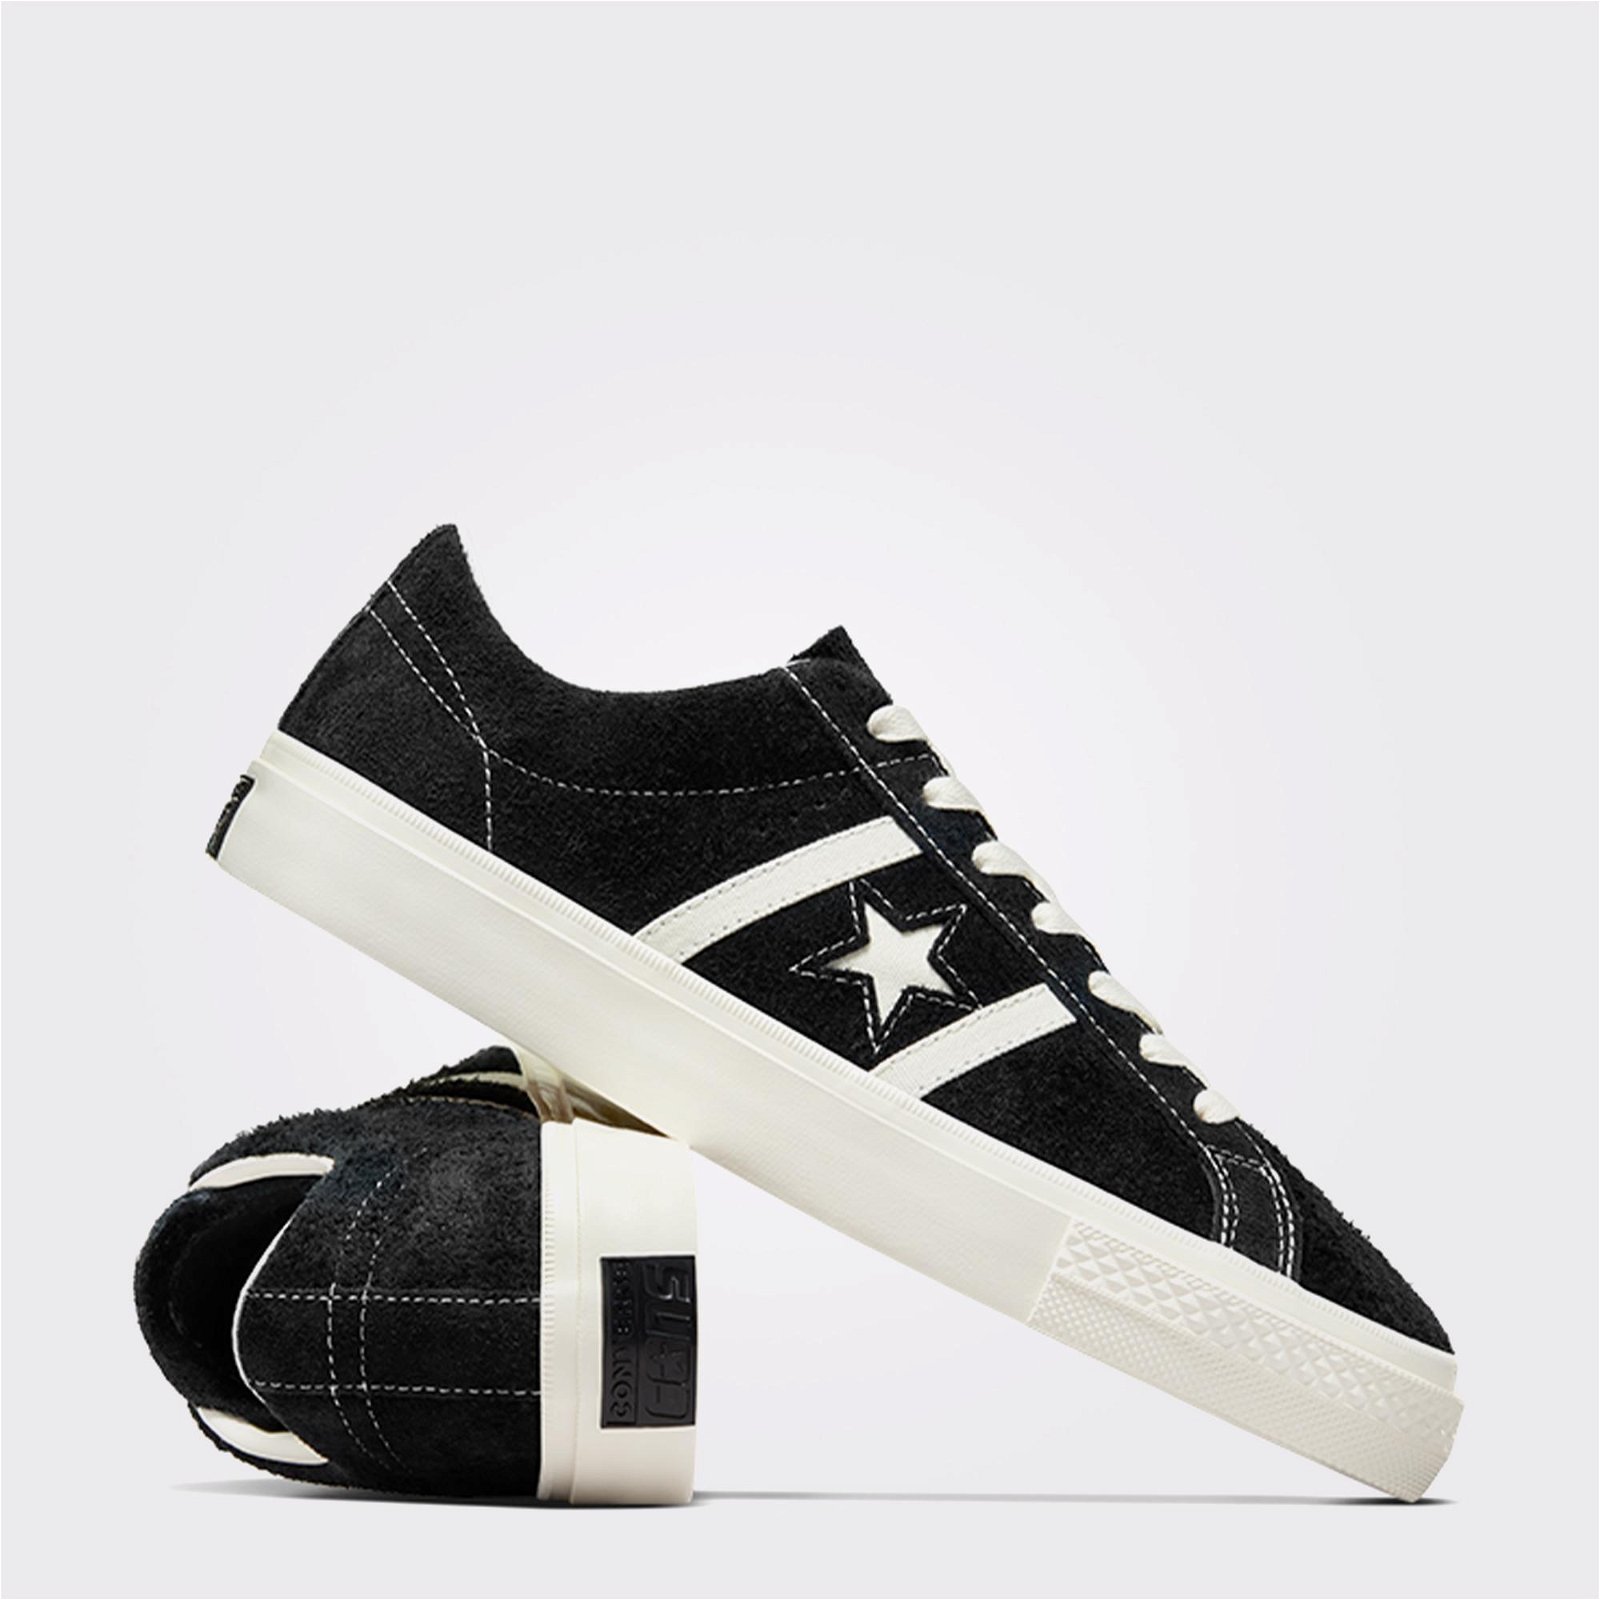 Converse One Star Academy Pro Suede Unisex Siyah Sneaker